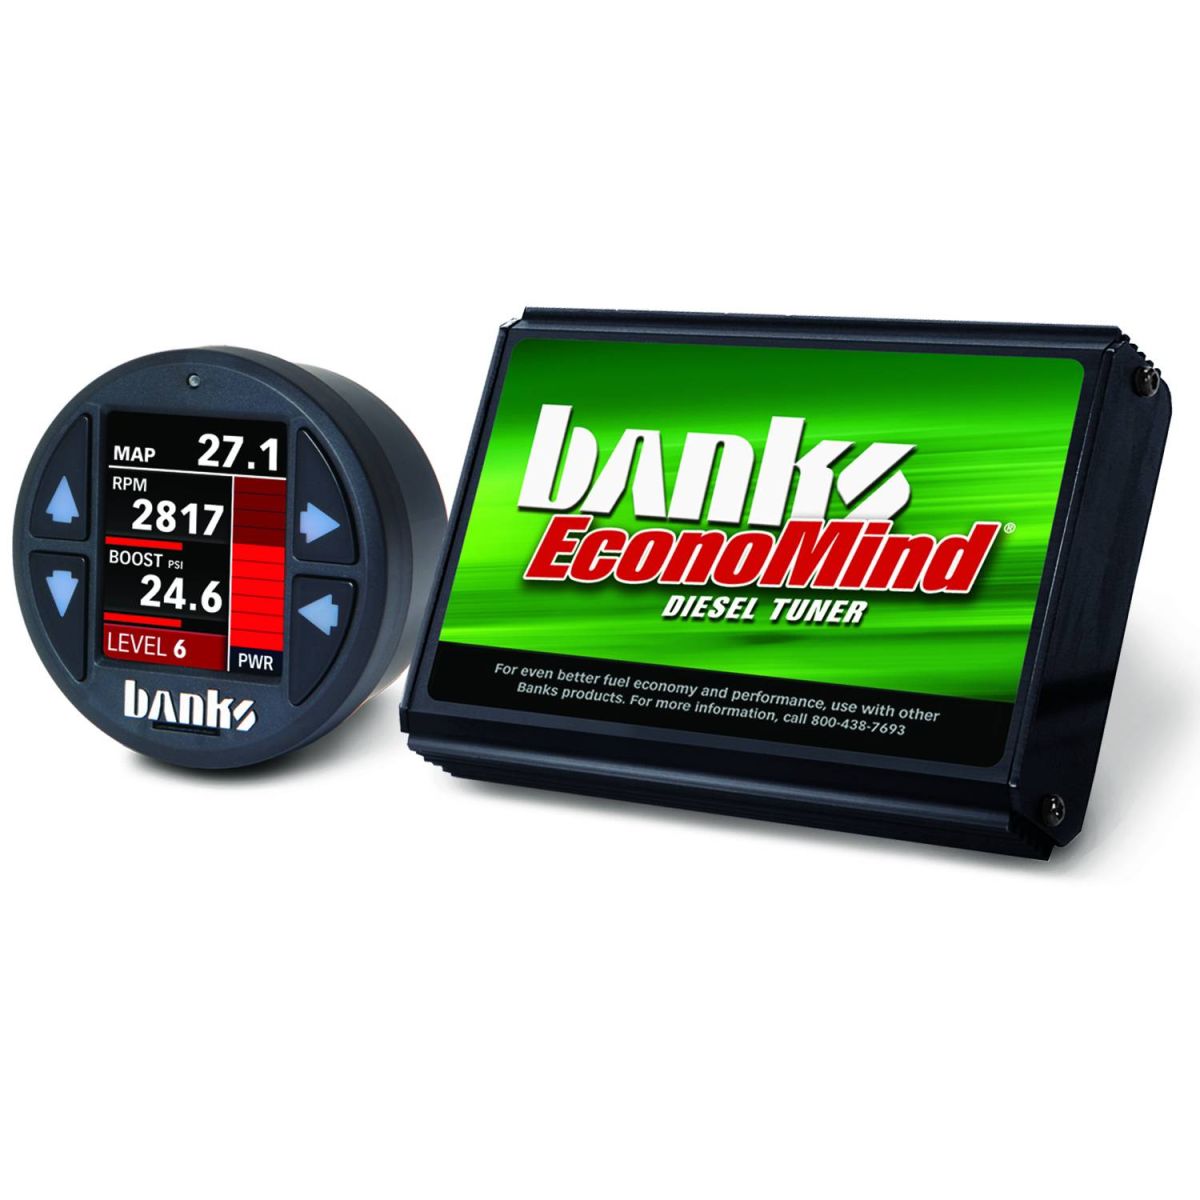 Banks Power - Banks Power Economind Diesel Tuner (PowerPack calibration) with Banks iDash 1.8 Super Gauge for use with 2006-2007 Chevy 6.6L, LLY-LBZ